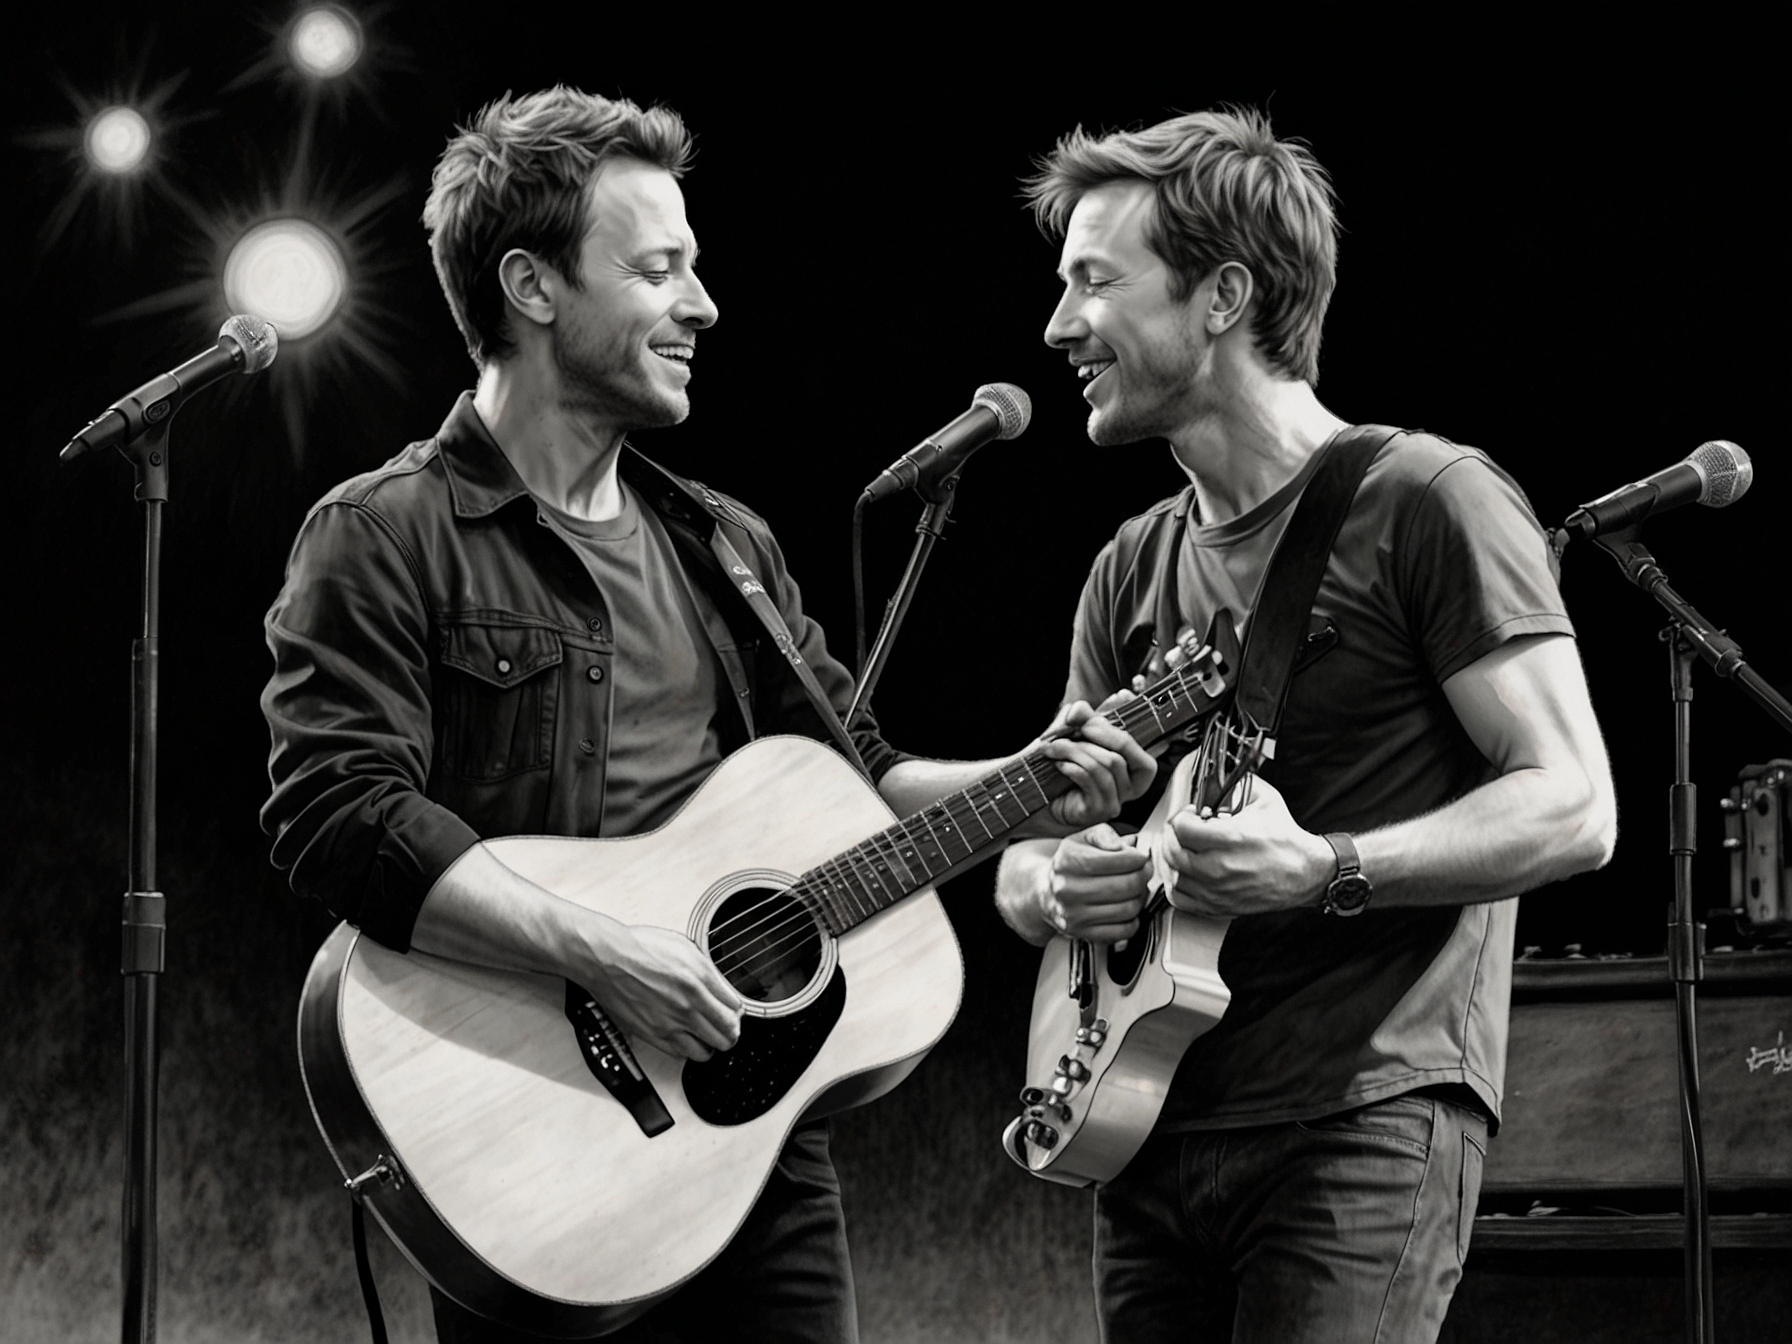 Chris Martin and Michael J. Fox share a heartfelt moment on stage during the performance of 'Fix You'. Martin is seen expressing admiration while Fox plays guitar, symbolizing resilience and connection.